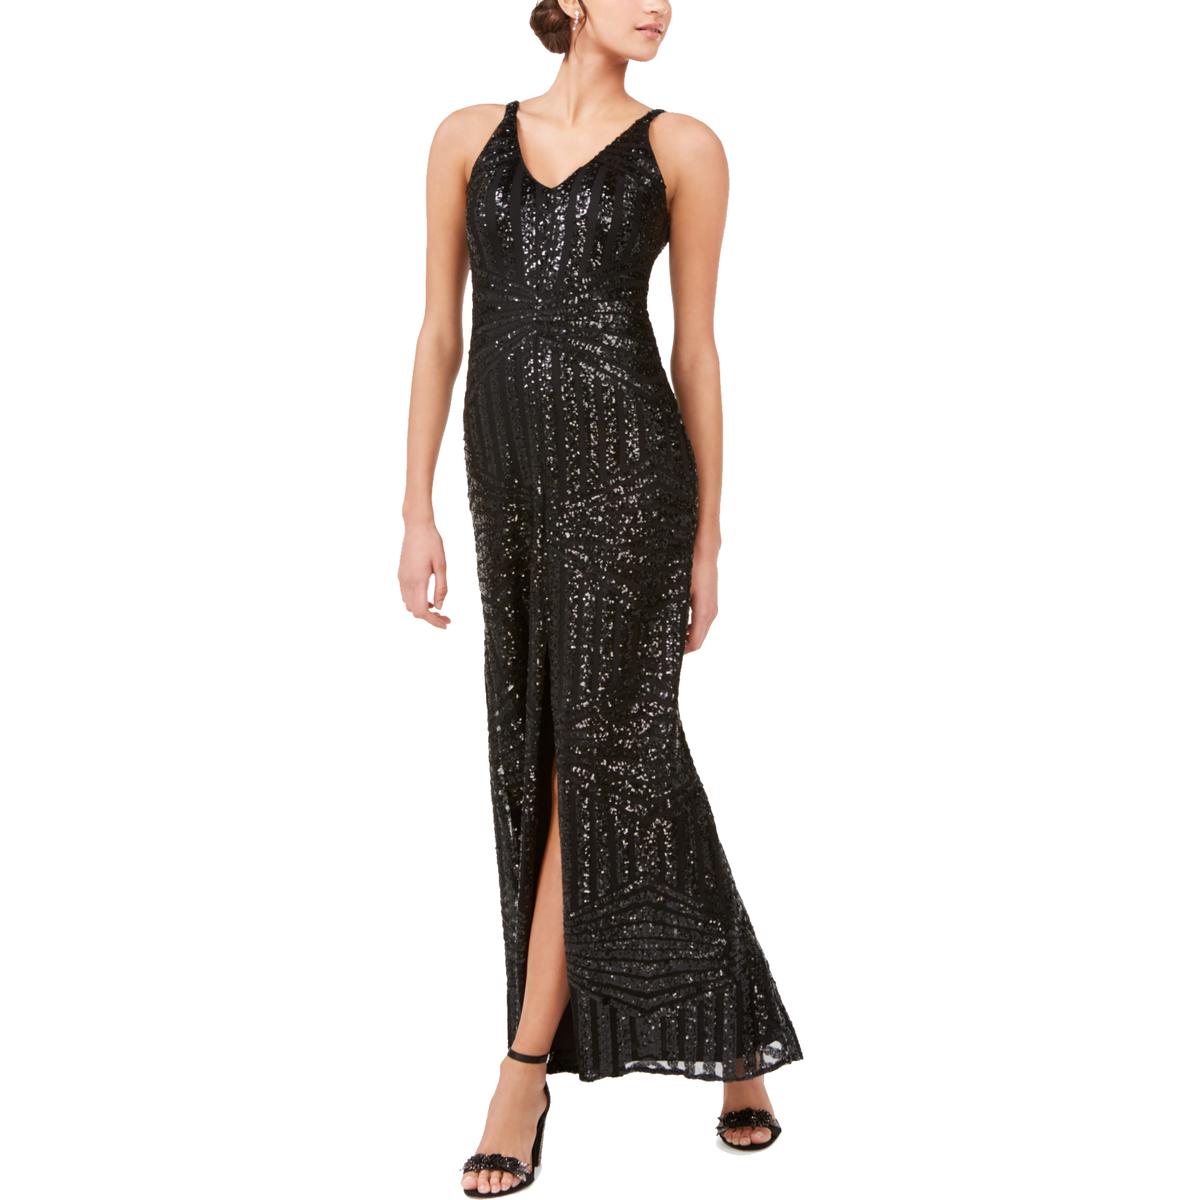 NW Nightway Womens Black Sequined Double V Evening Formal Dress Gown 6